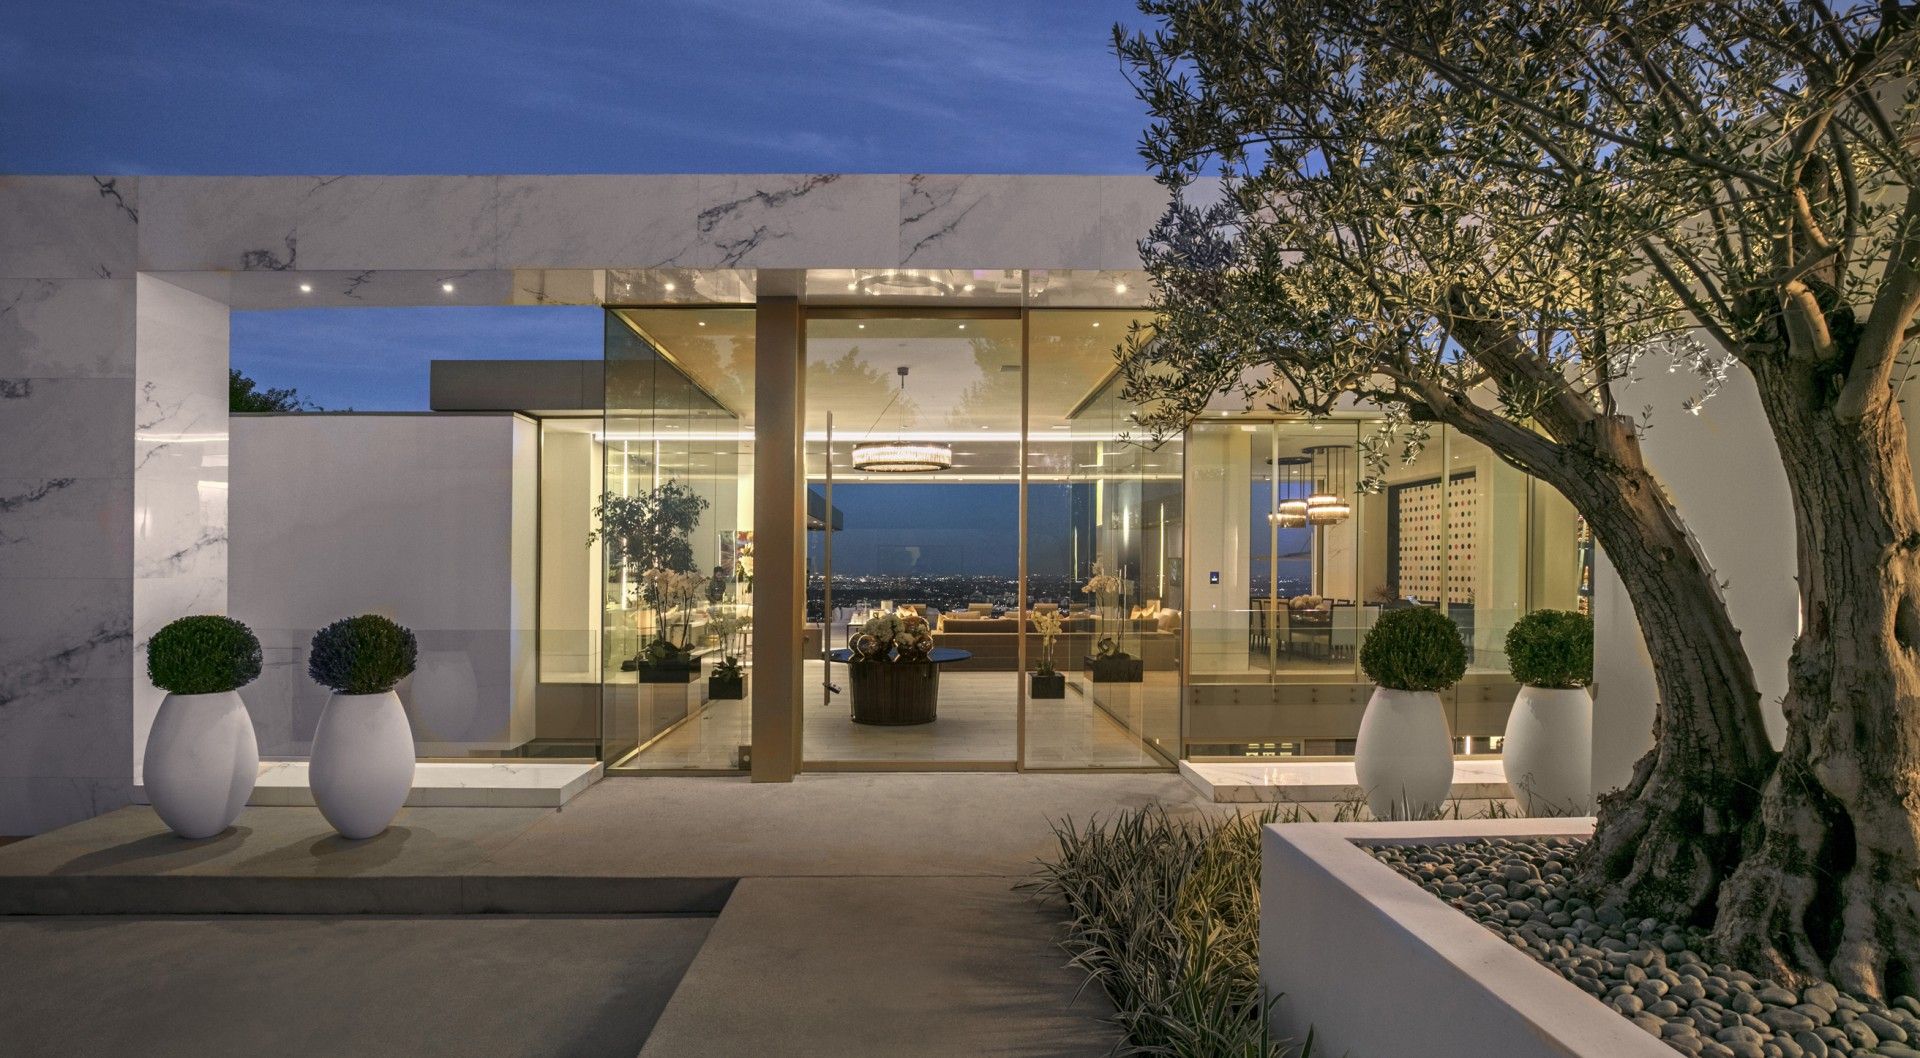 Luxury Los Angeles villa designed by McClean Design Architects